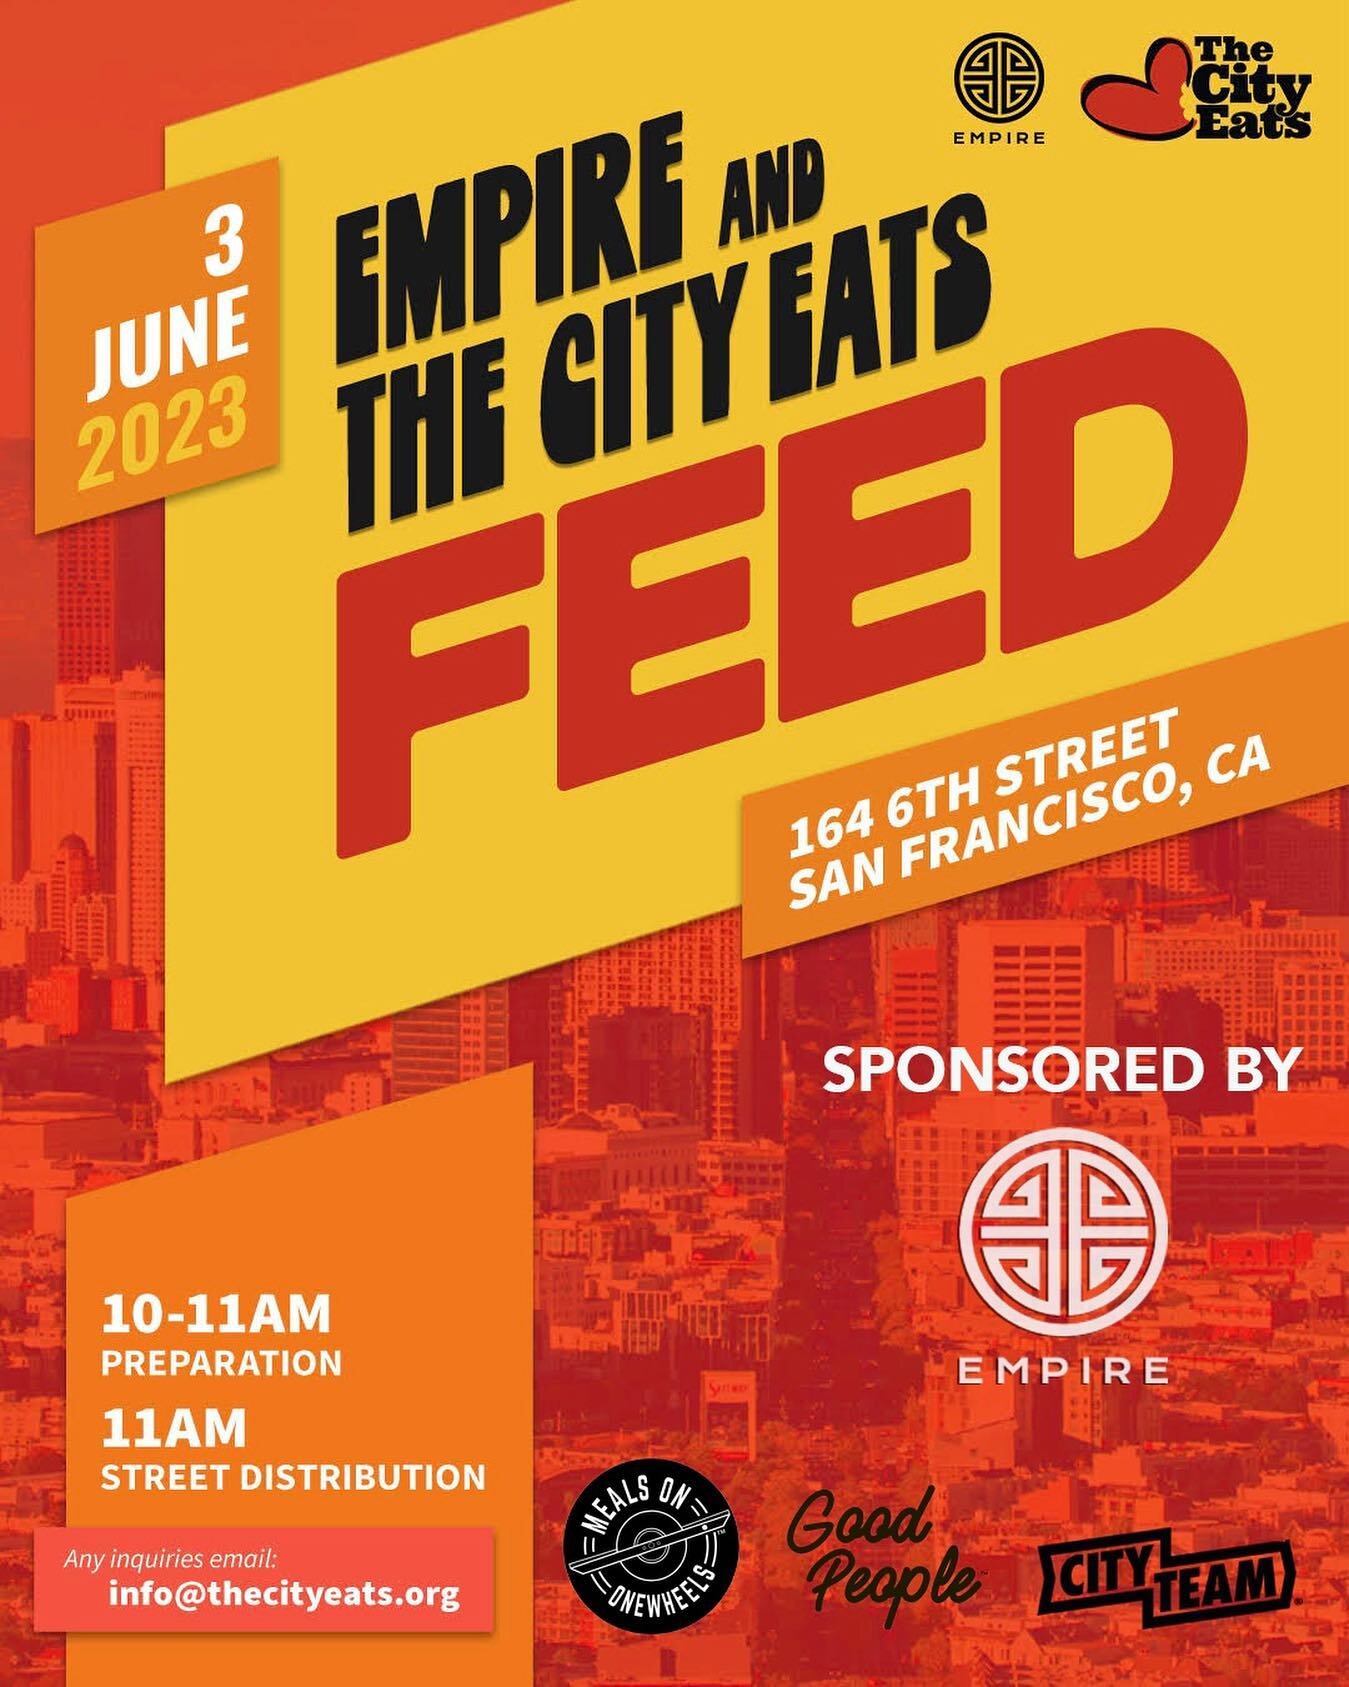 SATURDAY, June 3rd
10am Meal Prep
11am Meal Pick-Up for Street Distribution. Keep in mind street distribution will be by foot 🦶 , your personal vehicles 🚗, or one wheel.
 
📍@cityteamsf
164 6th Street, San Francisco, CA
*ALL Ages are Welcome to Vol